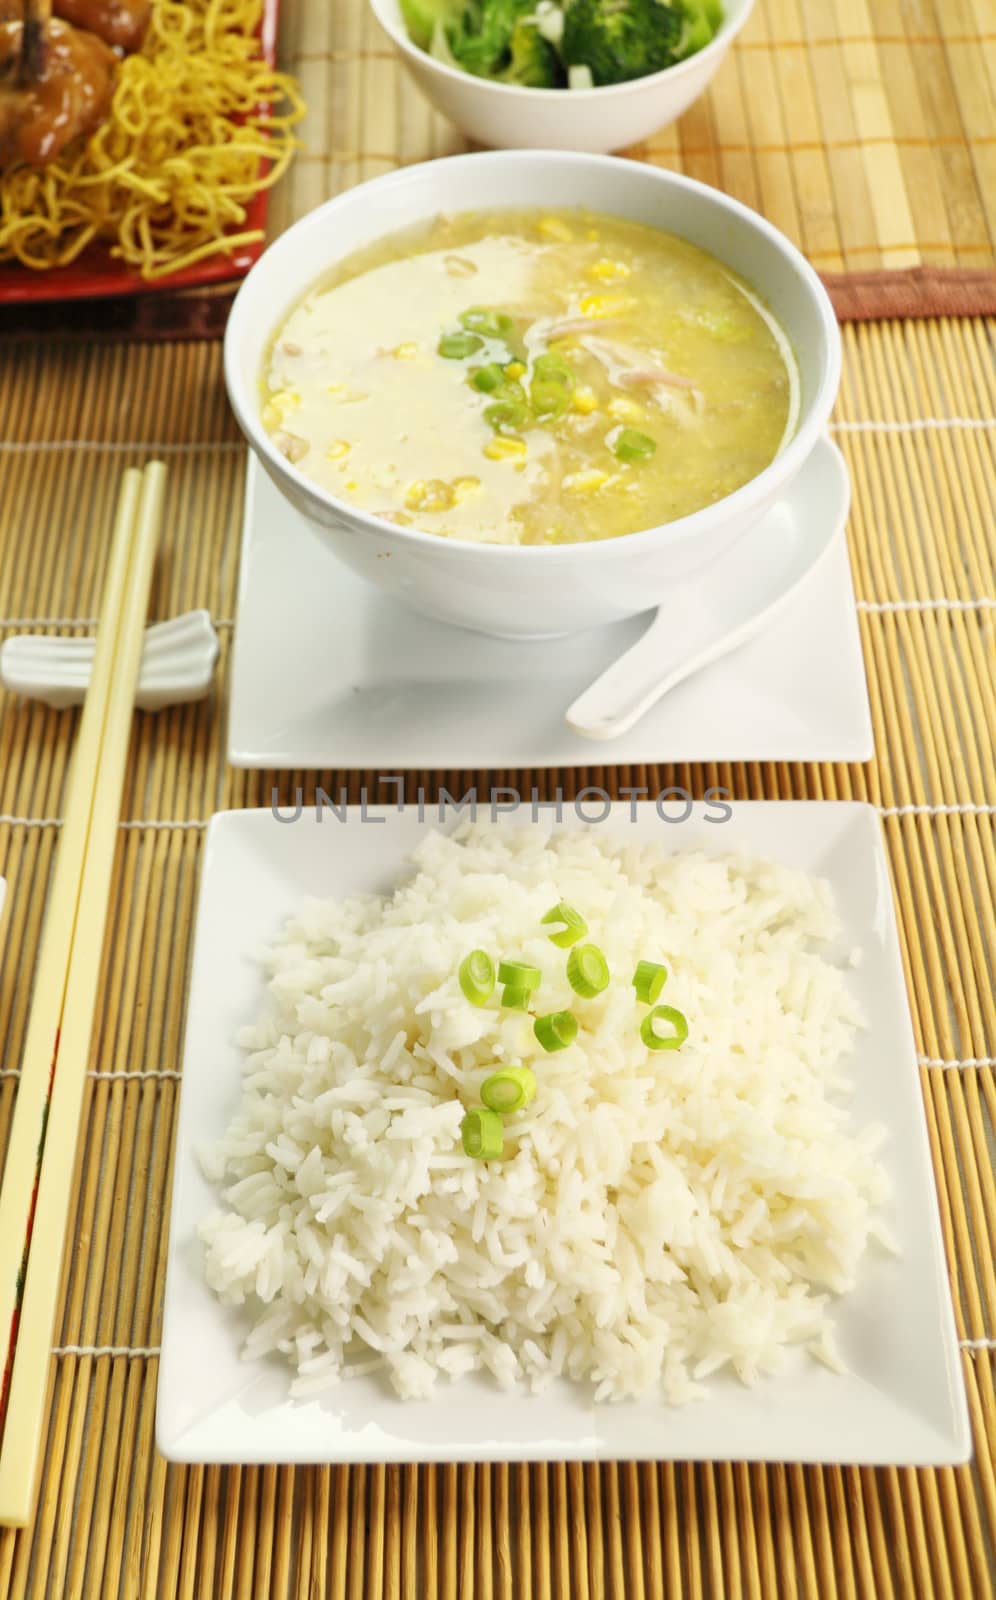 Boiled rice and chicken and corn soup ready to serve.